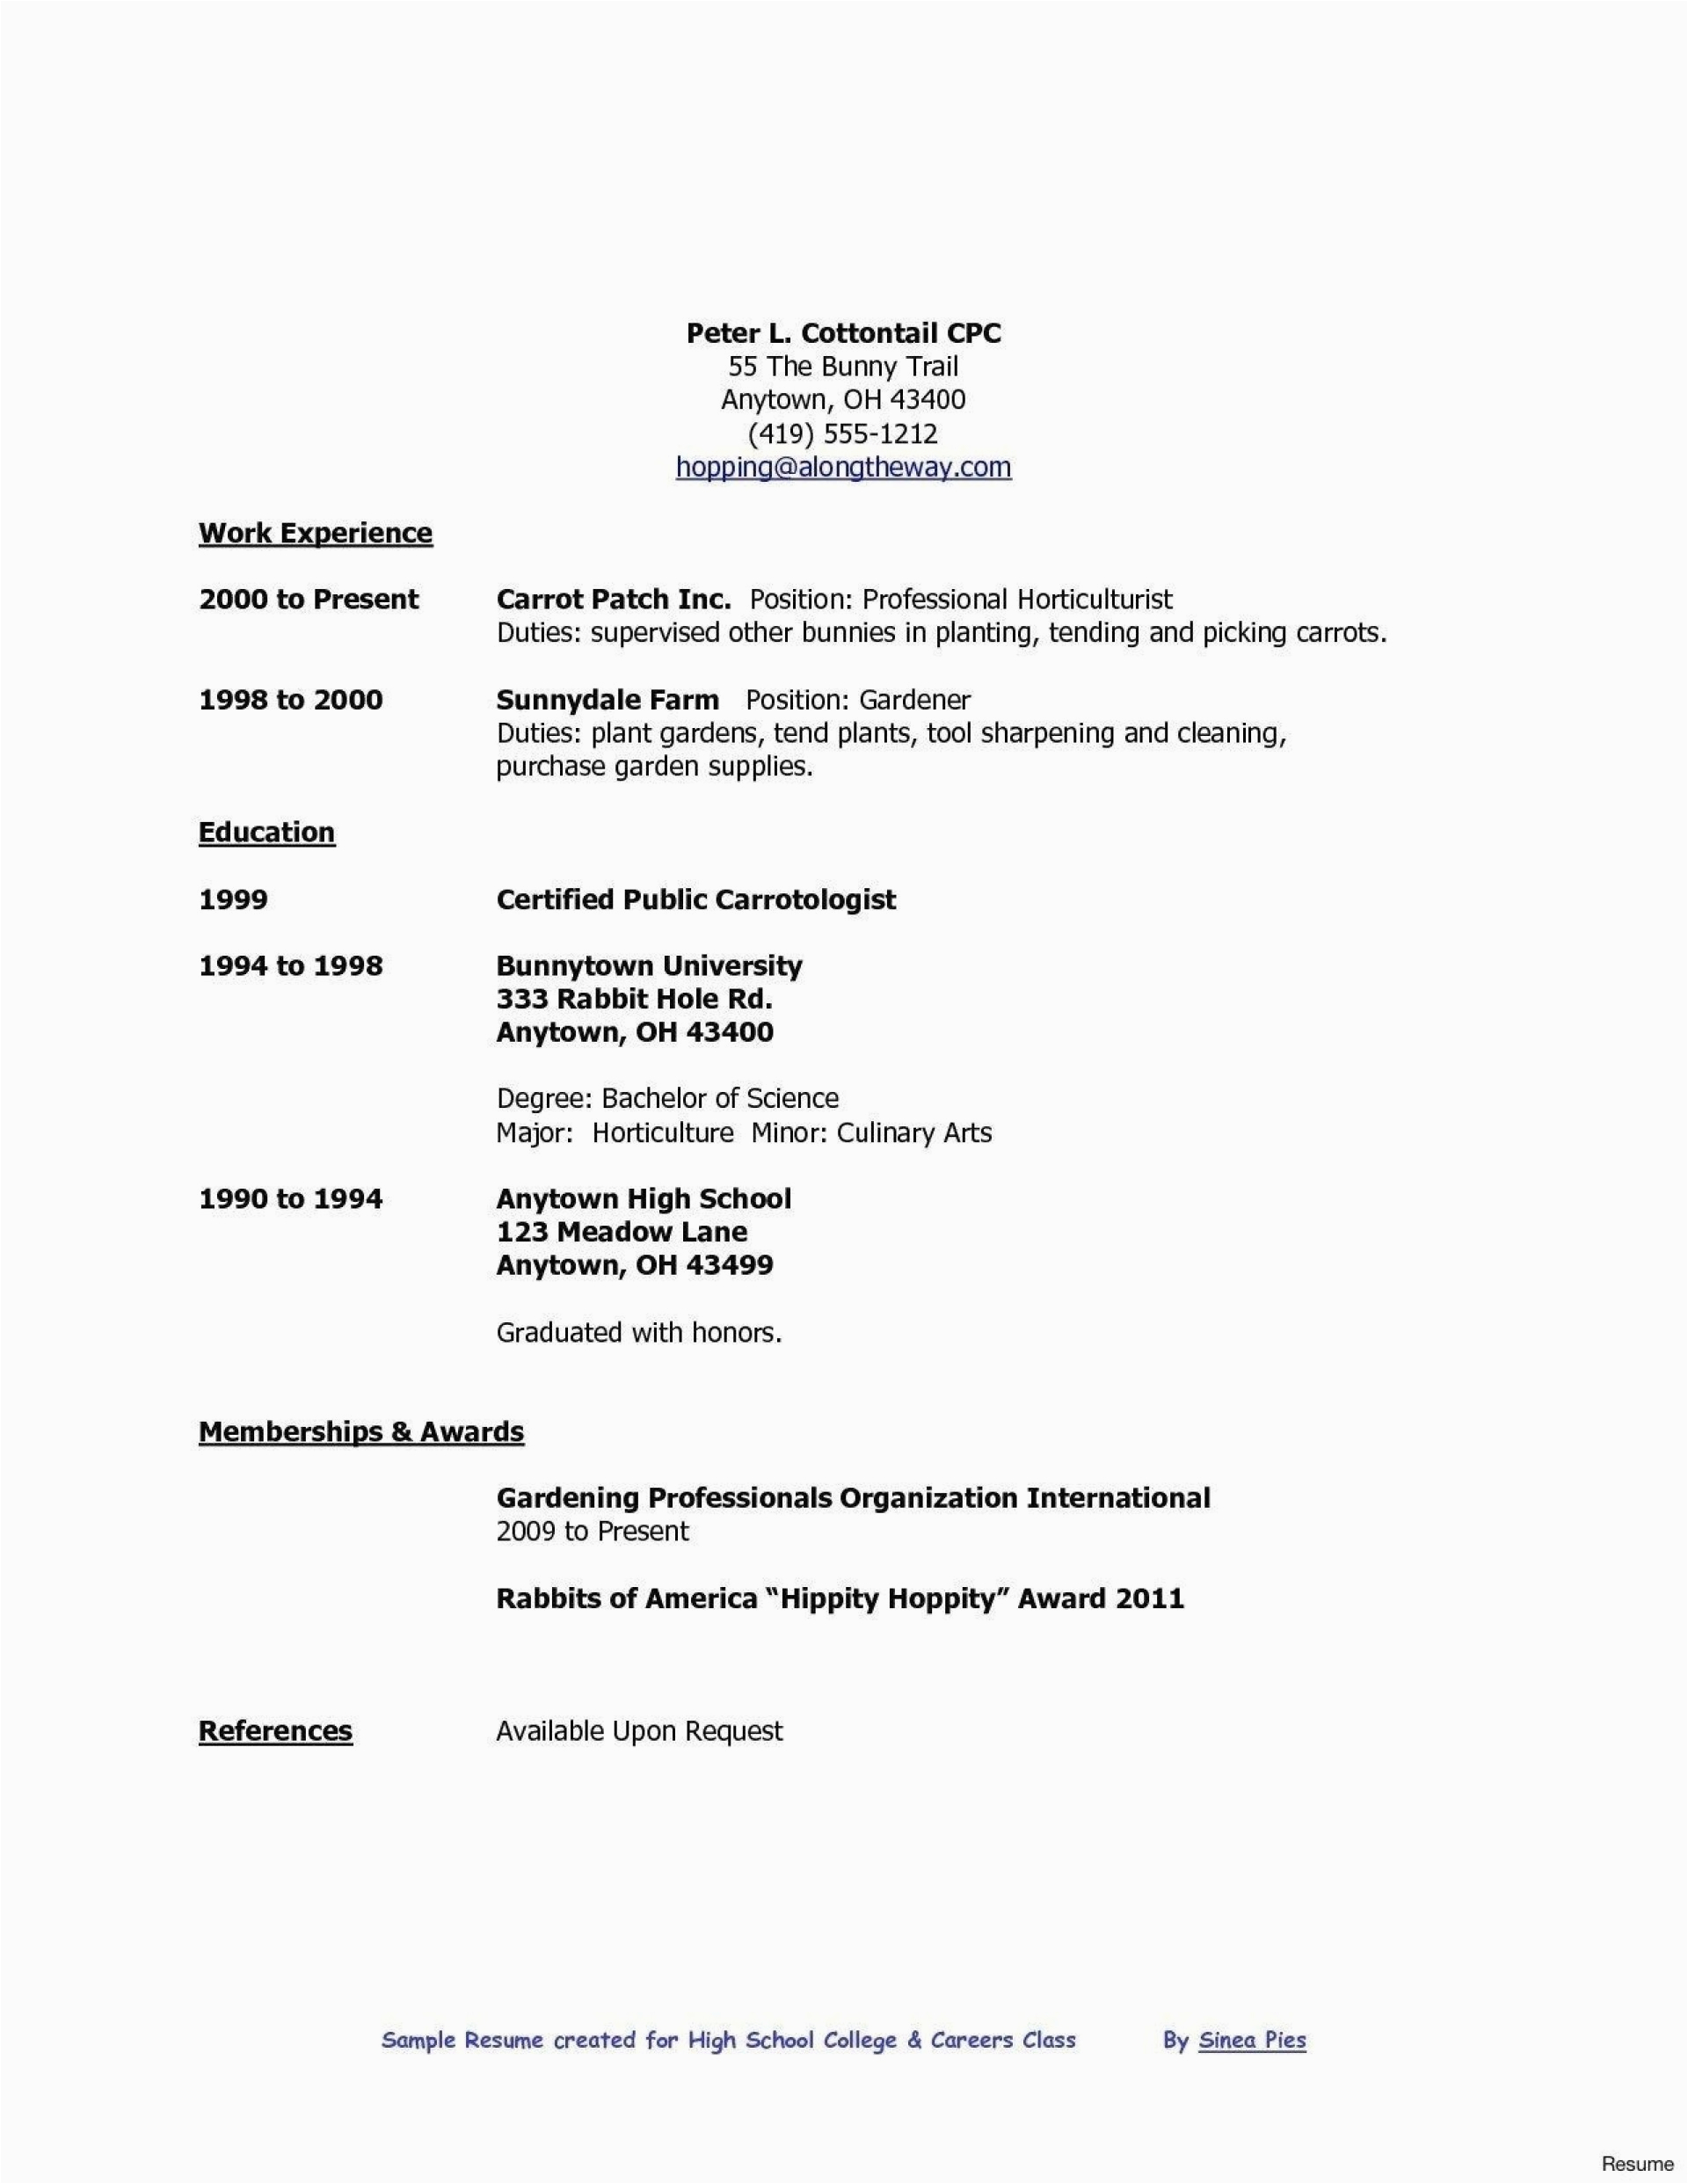 Sample Resume for Highschool Graduate with No Experience Grade 10 Teenager High School Student Resume with No Work